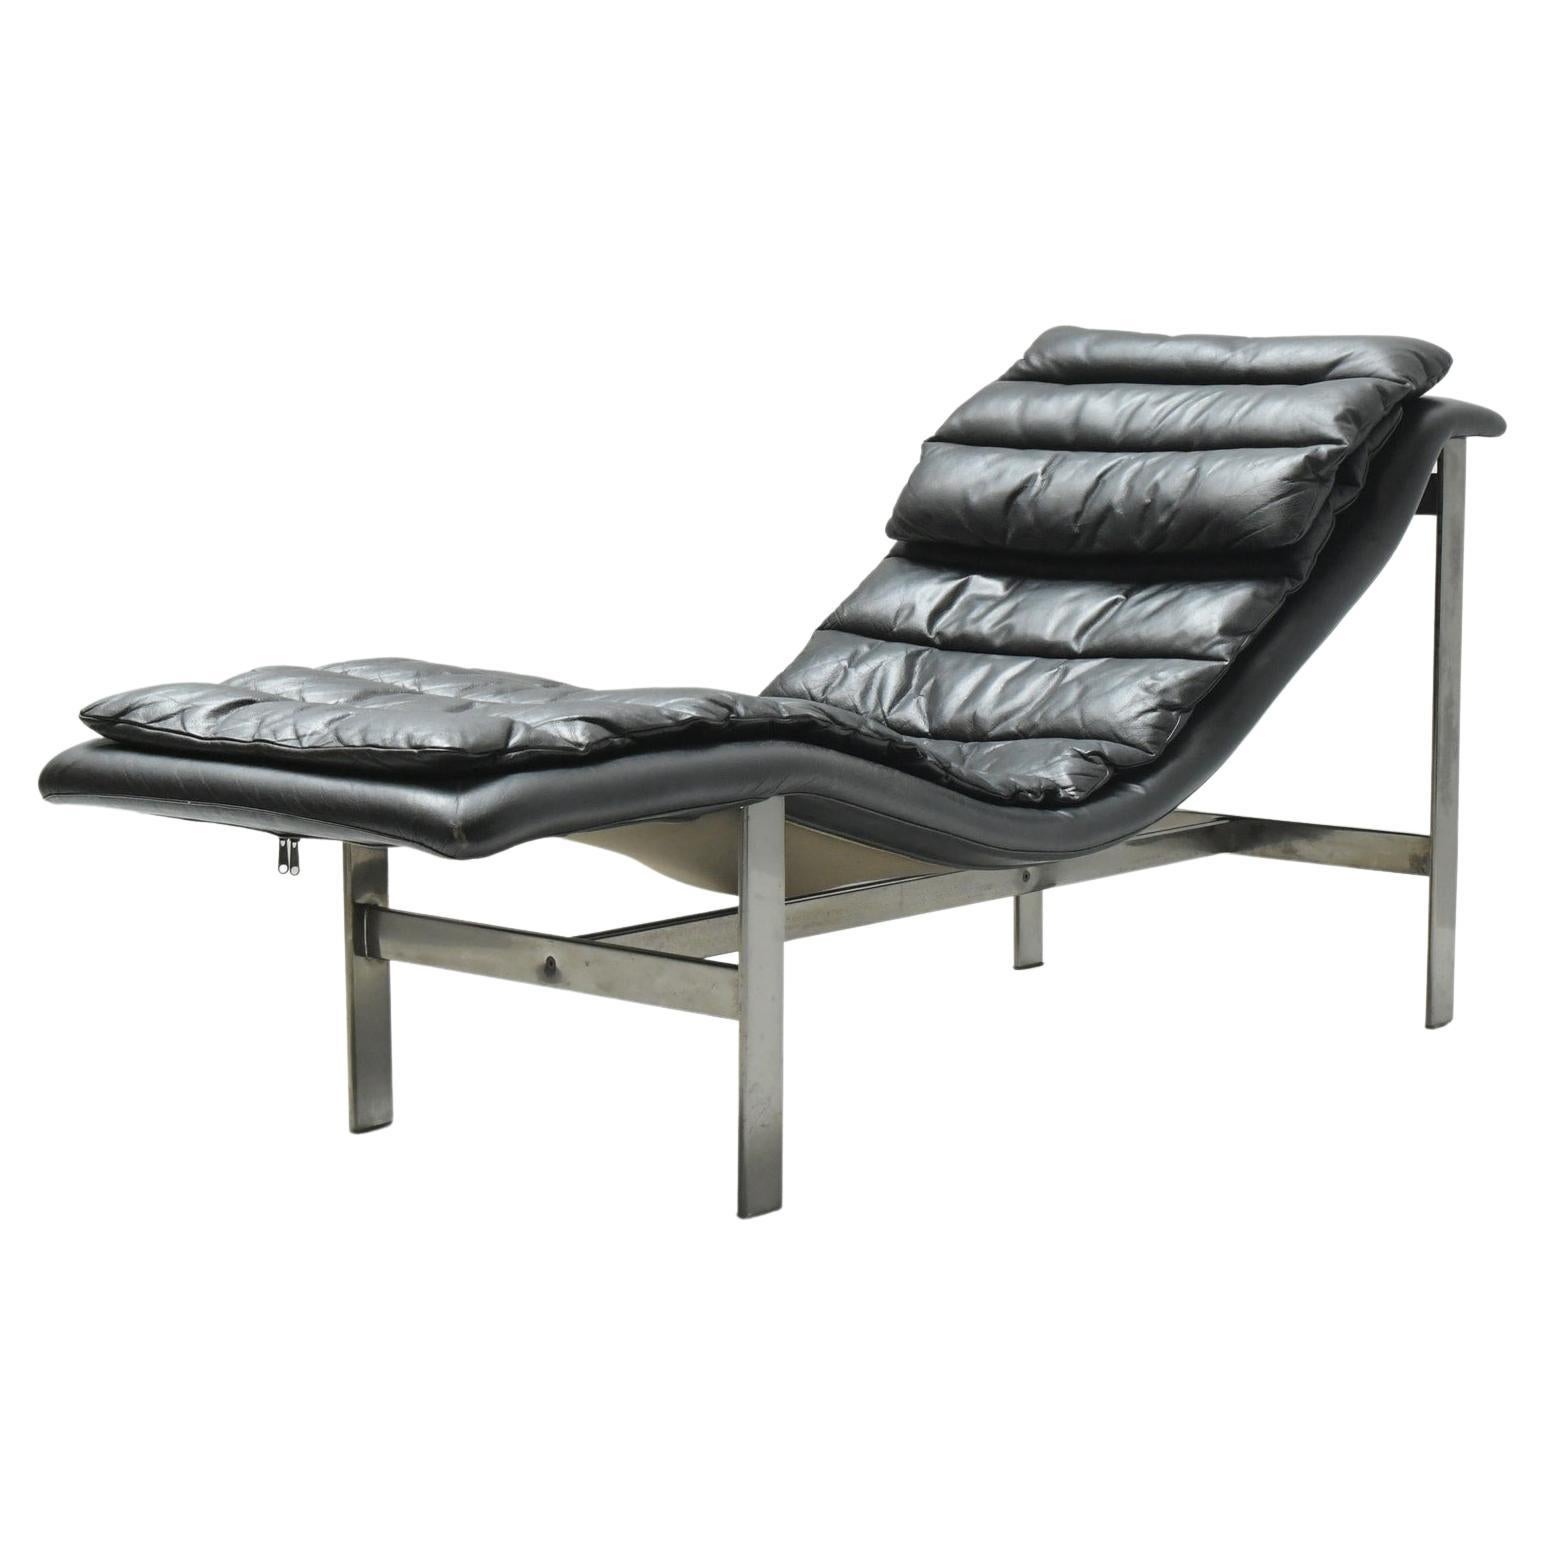 Vintage Lounge daybed in black leather by Mobel Italia - Italy